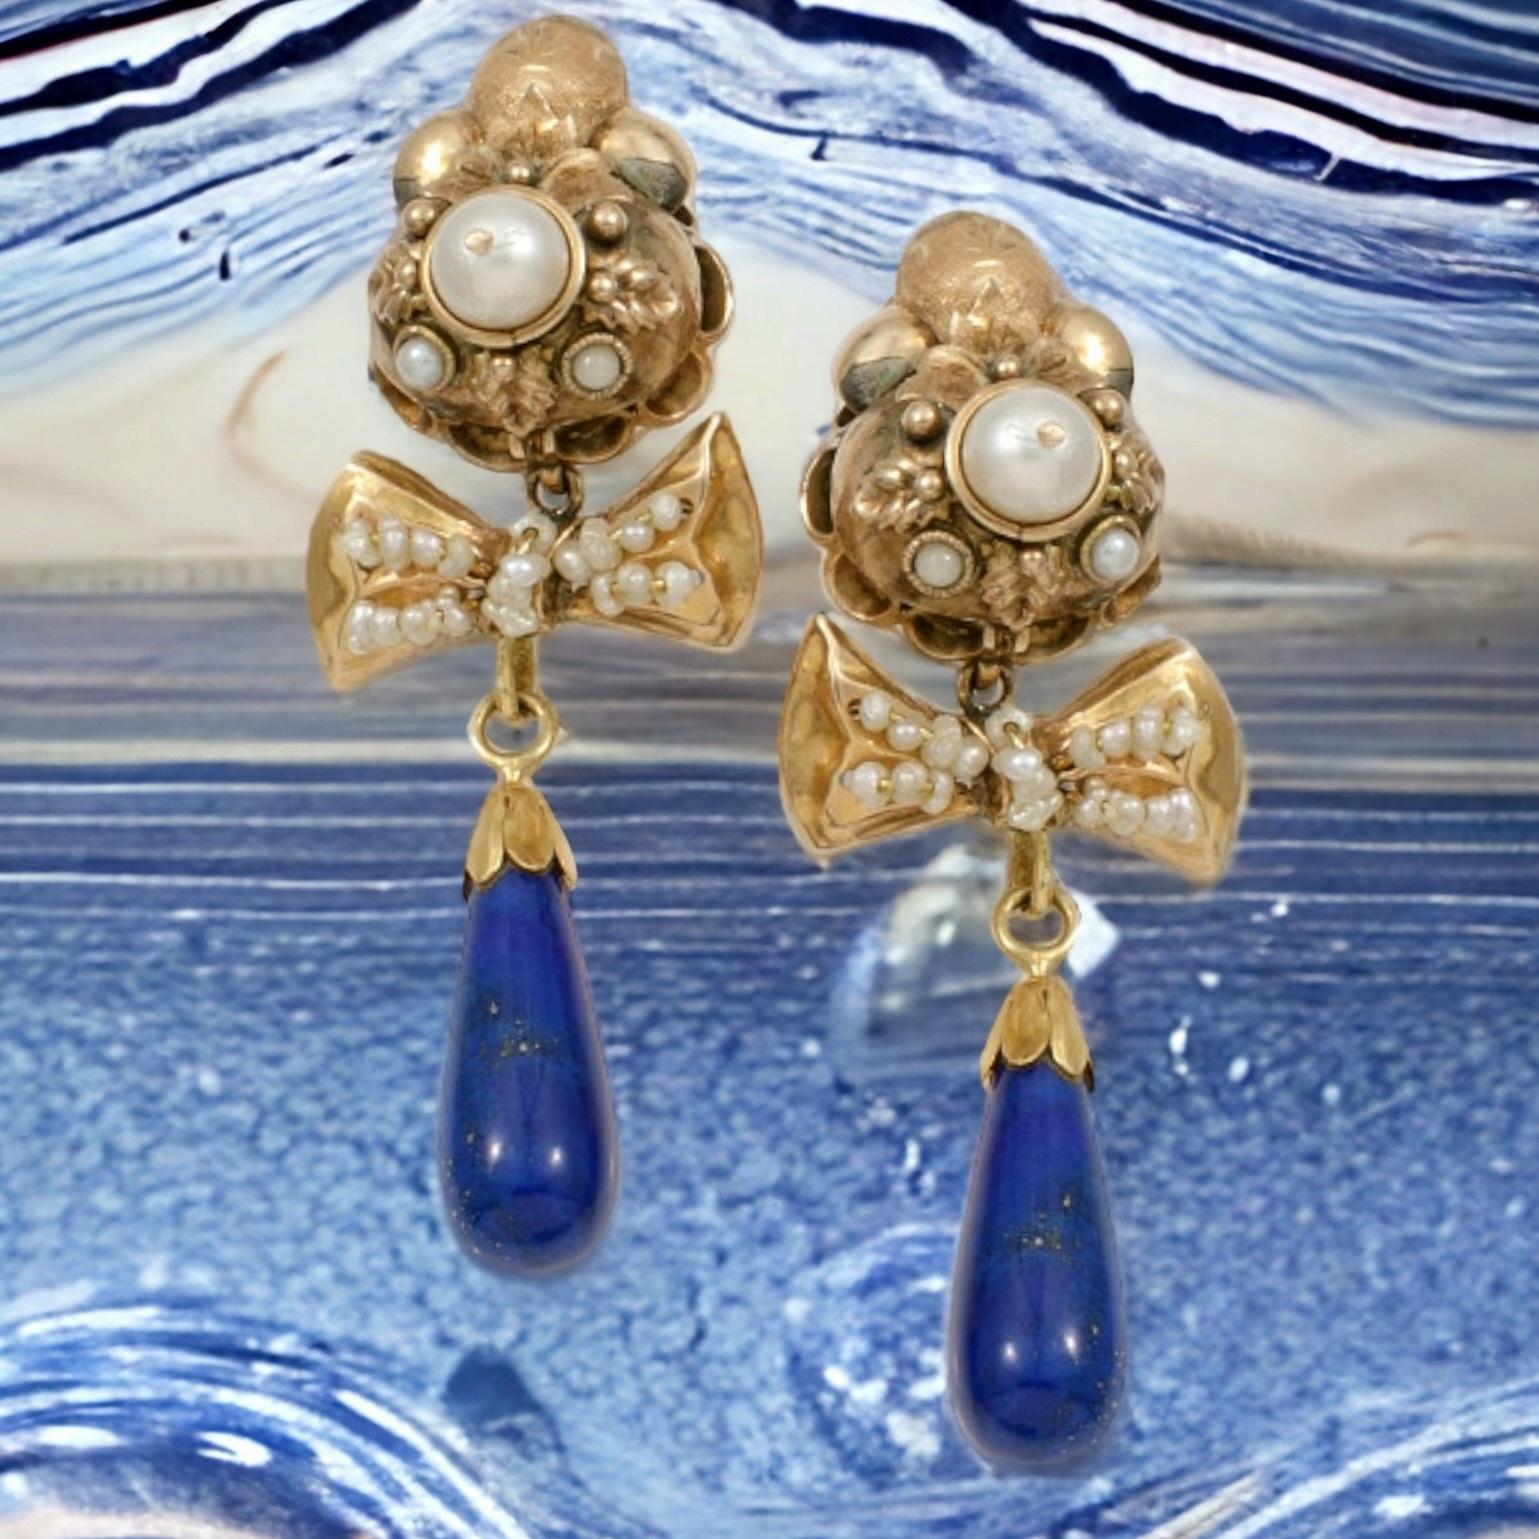 Cabochon Antique Iberian Lapis Lazuli & Seed Pearls 18 Karat Gold Pendant Bow Earrings For Sale